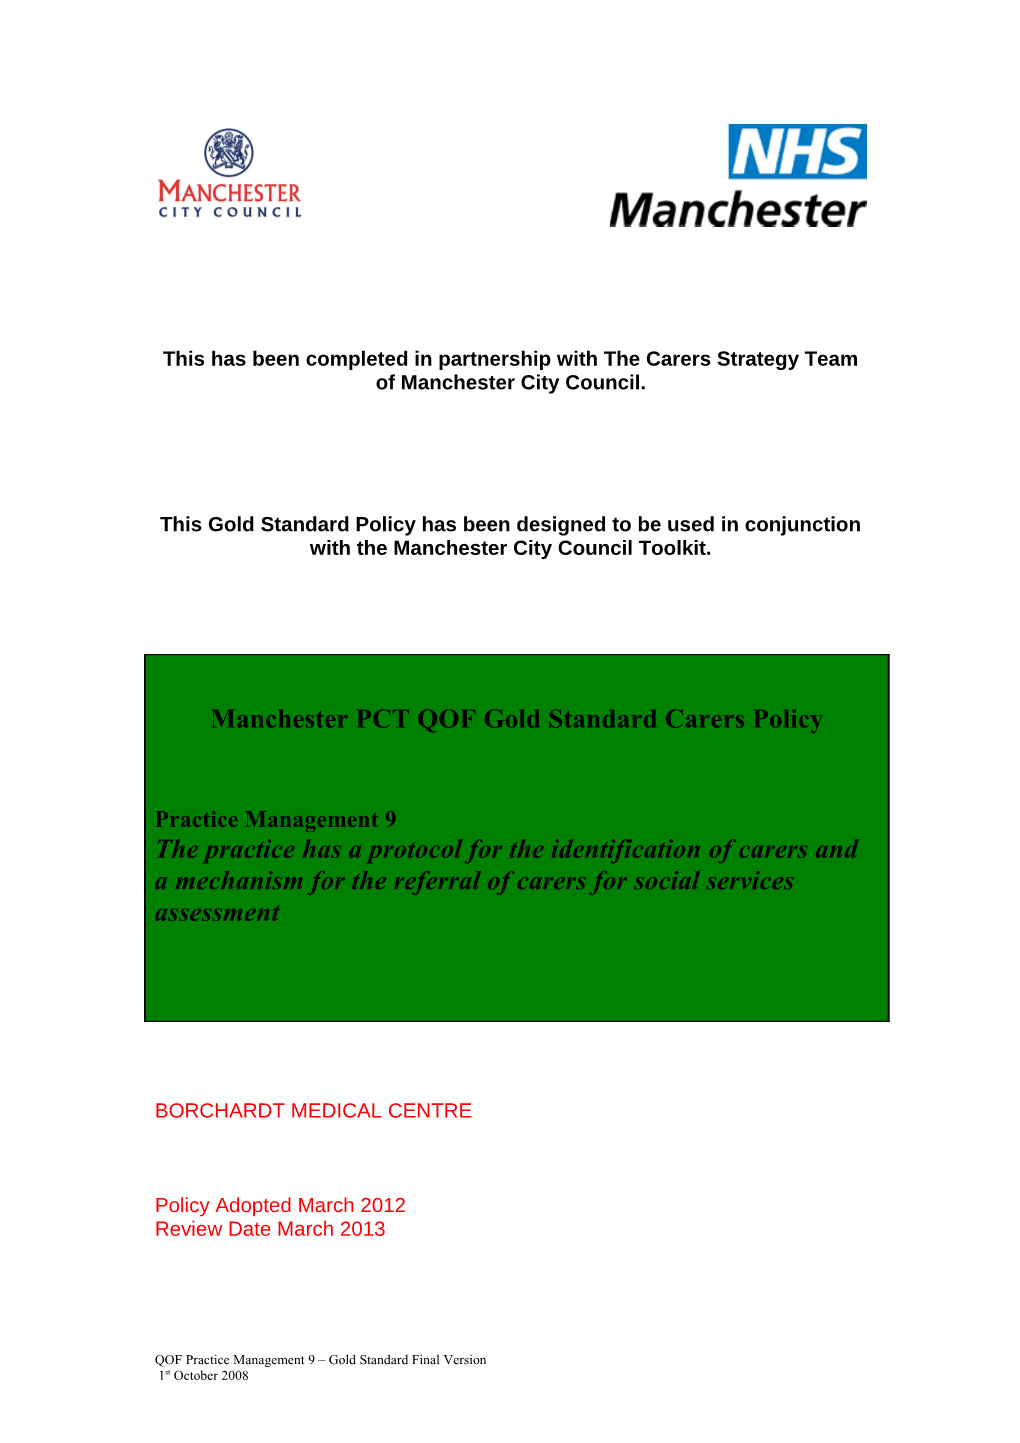 This Has Been Completed in Partnership with the Carers Strategy Team of Manchestercity